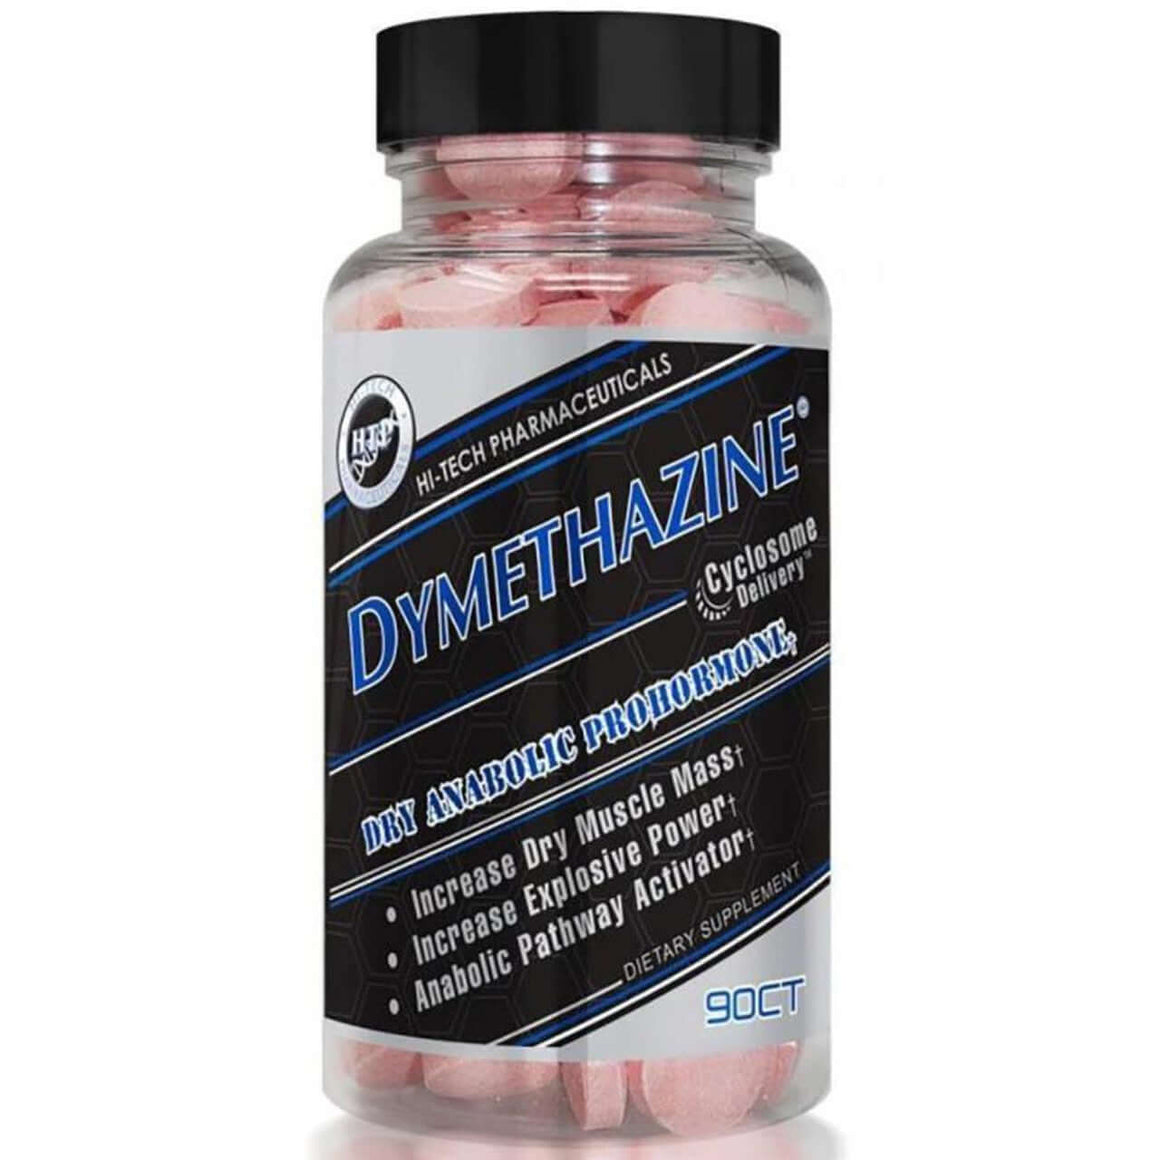 Hi-Tech Dymethazine Description Hi-Tech Pharmaceuticals Dymethazine 90 Tablets | Our Most Powerful Cutting Prohormone If you're looking for the newest & hottest Prohormone supplement on the market, look no further!! Hi-Tech Pharmaceuticals' Dymethazine is